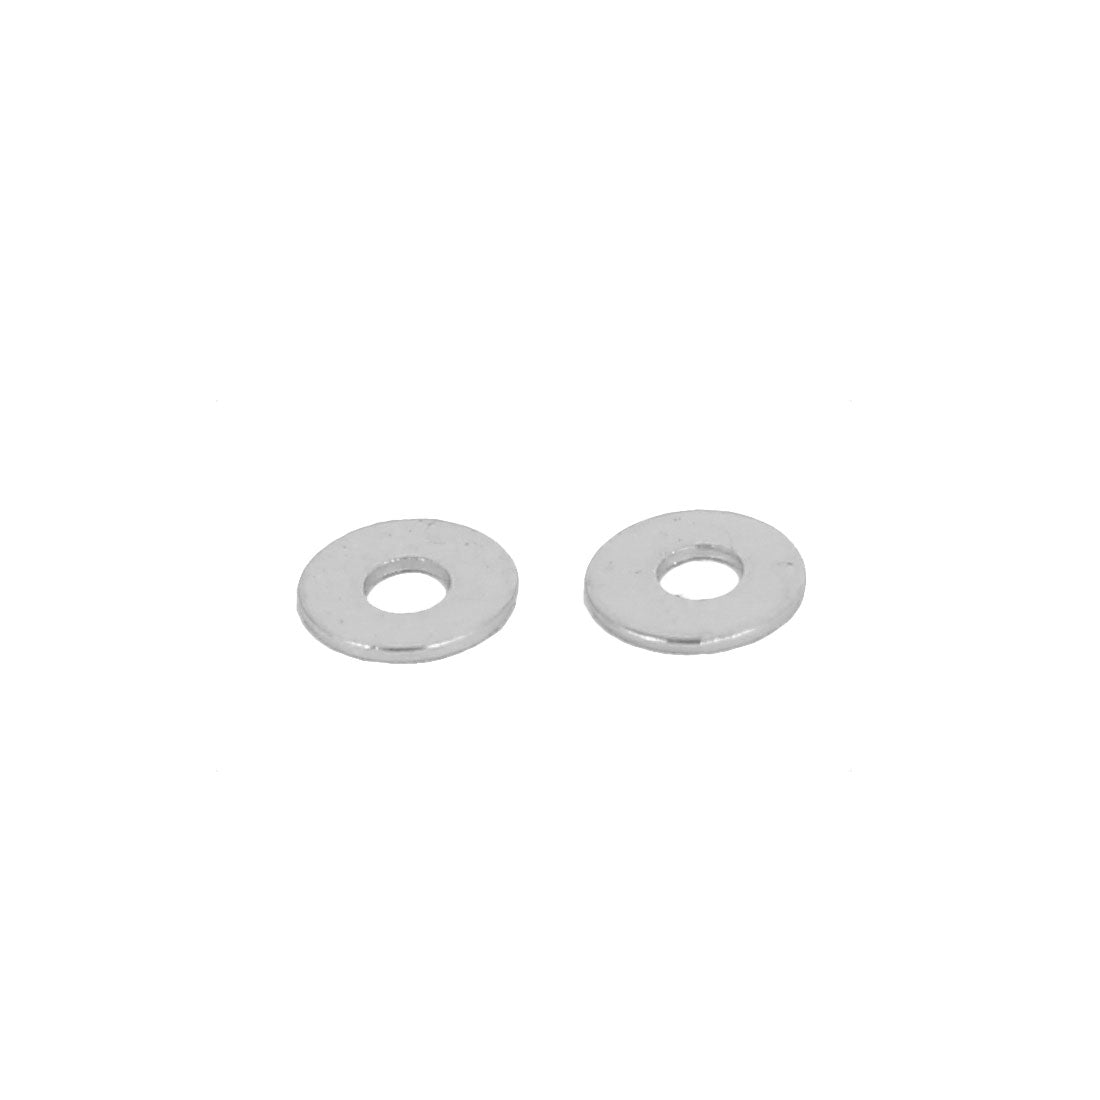 uxcell Uxcell M1.4 x 4mm x 0.3mm Nickel Plated Flat Washers Spacers Gaskets Fastener 100PCS